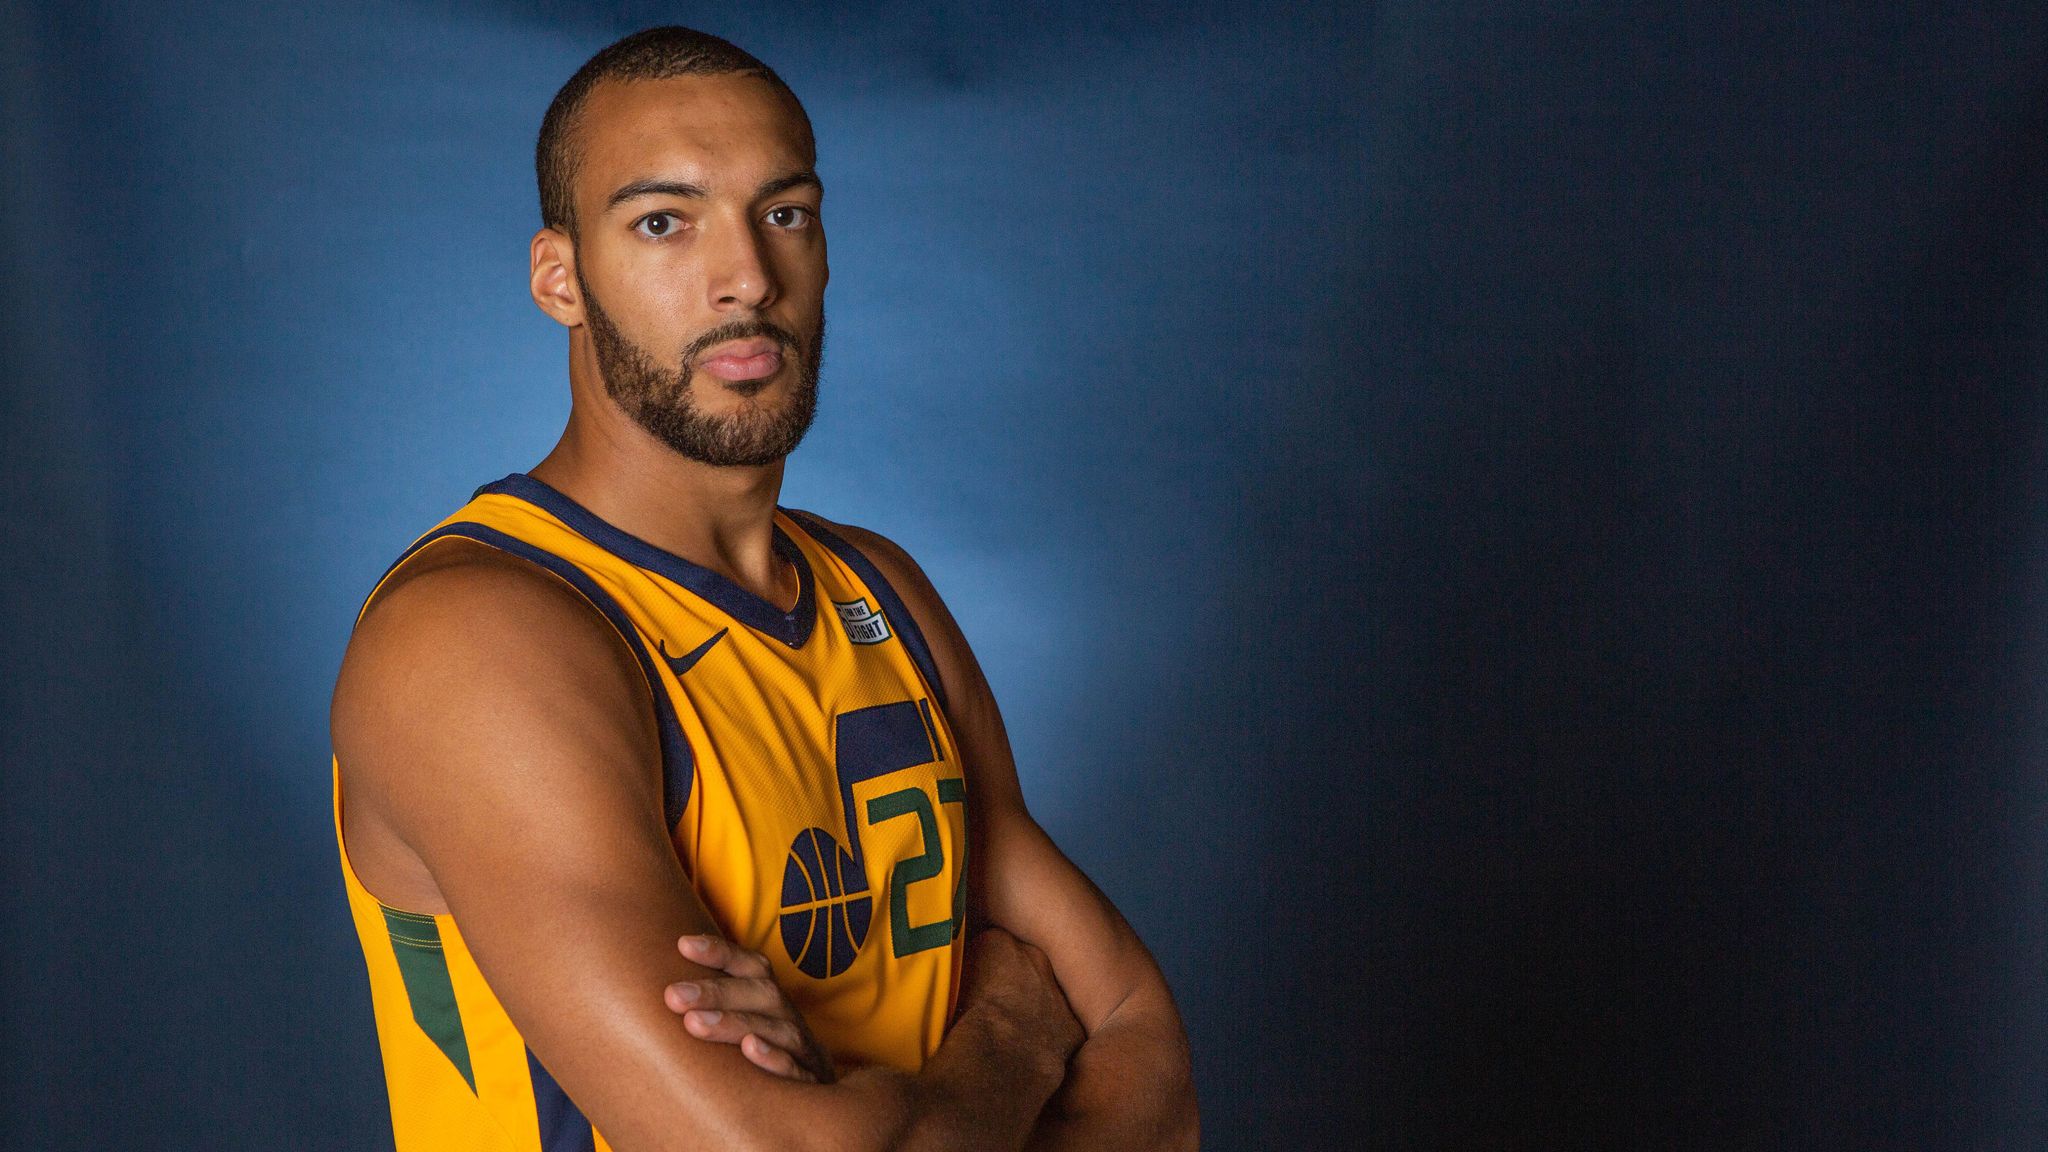 Rudy Gobert fires back at fans saying the Minnesota Timberwolves